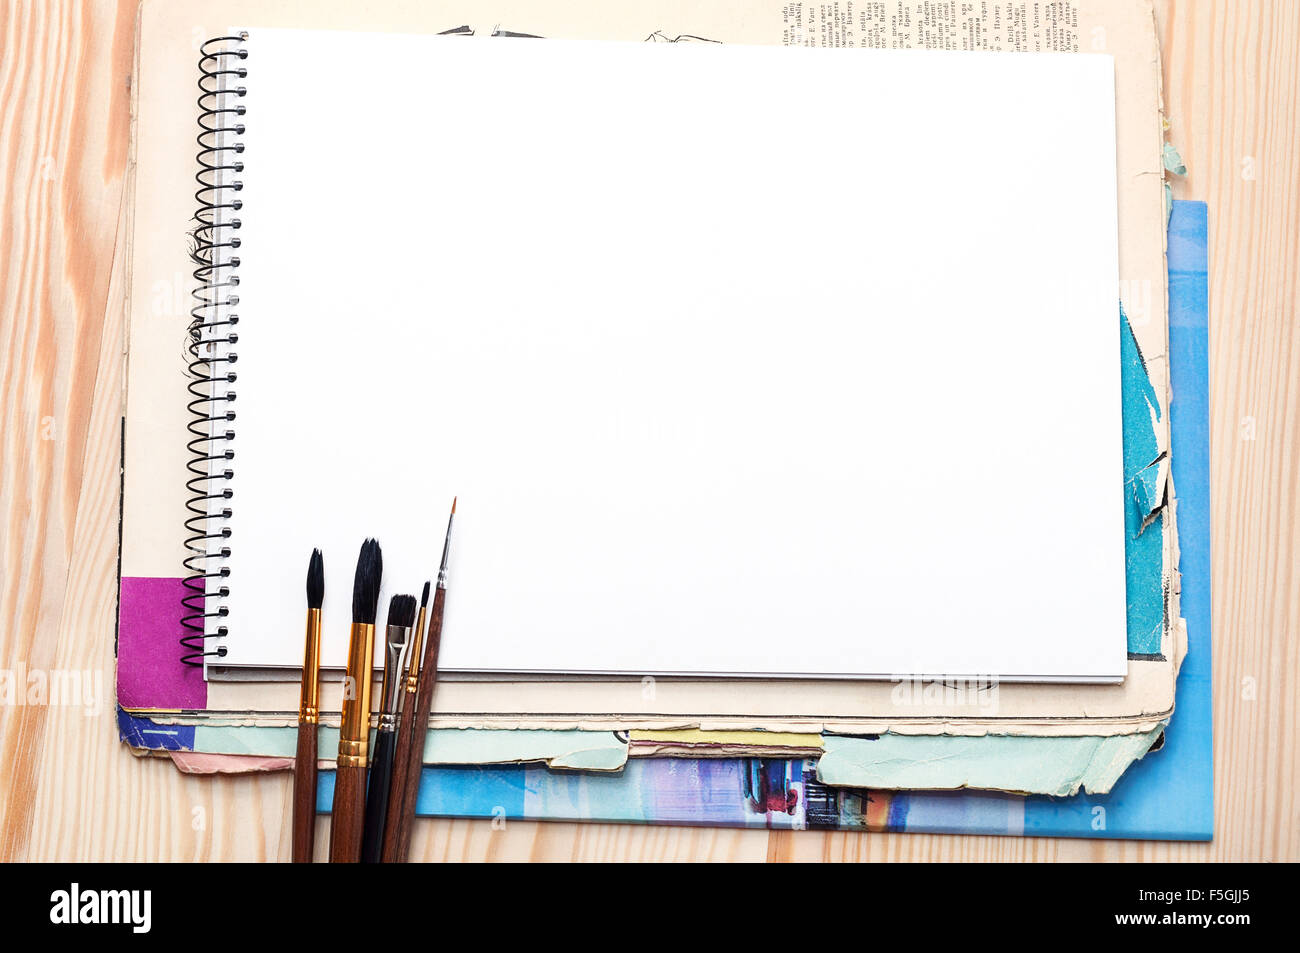 Blank notebook, brushes and old paper sheet on a wooden surface Stock Photo